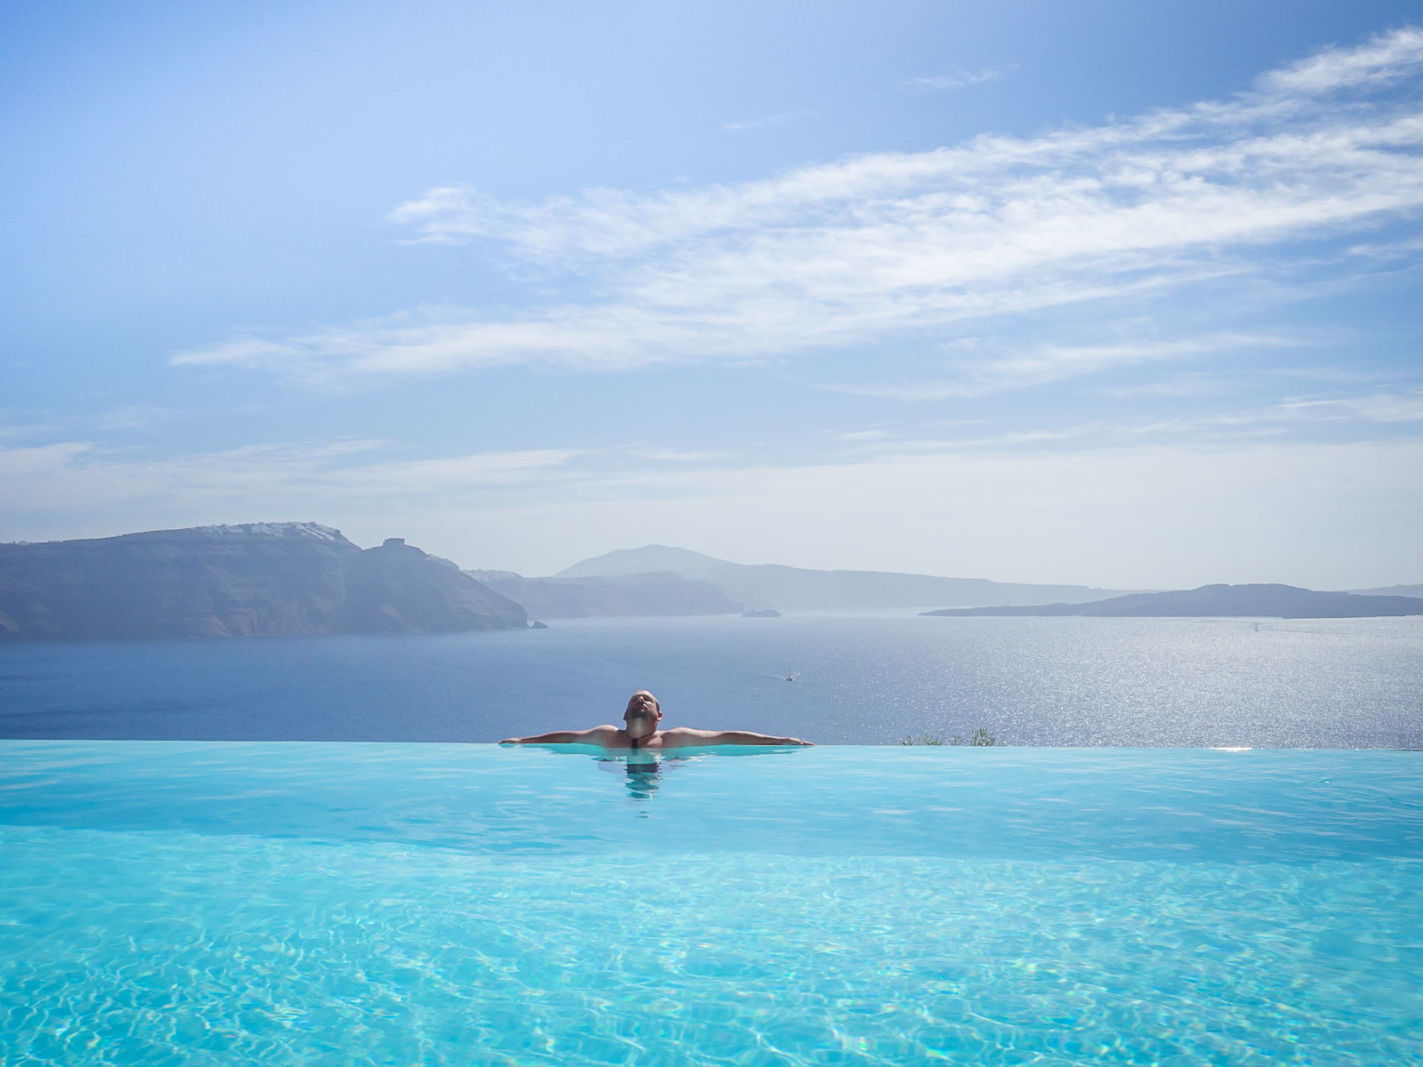 Where to stay in Santorini The Best Towns and Hotels